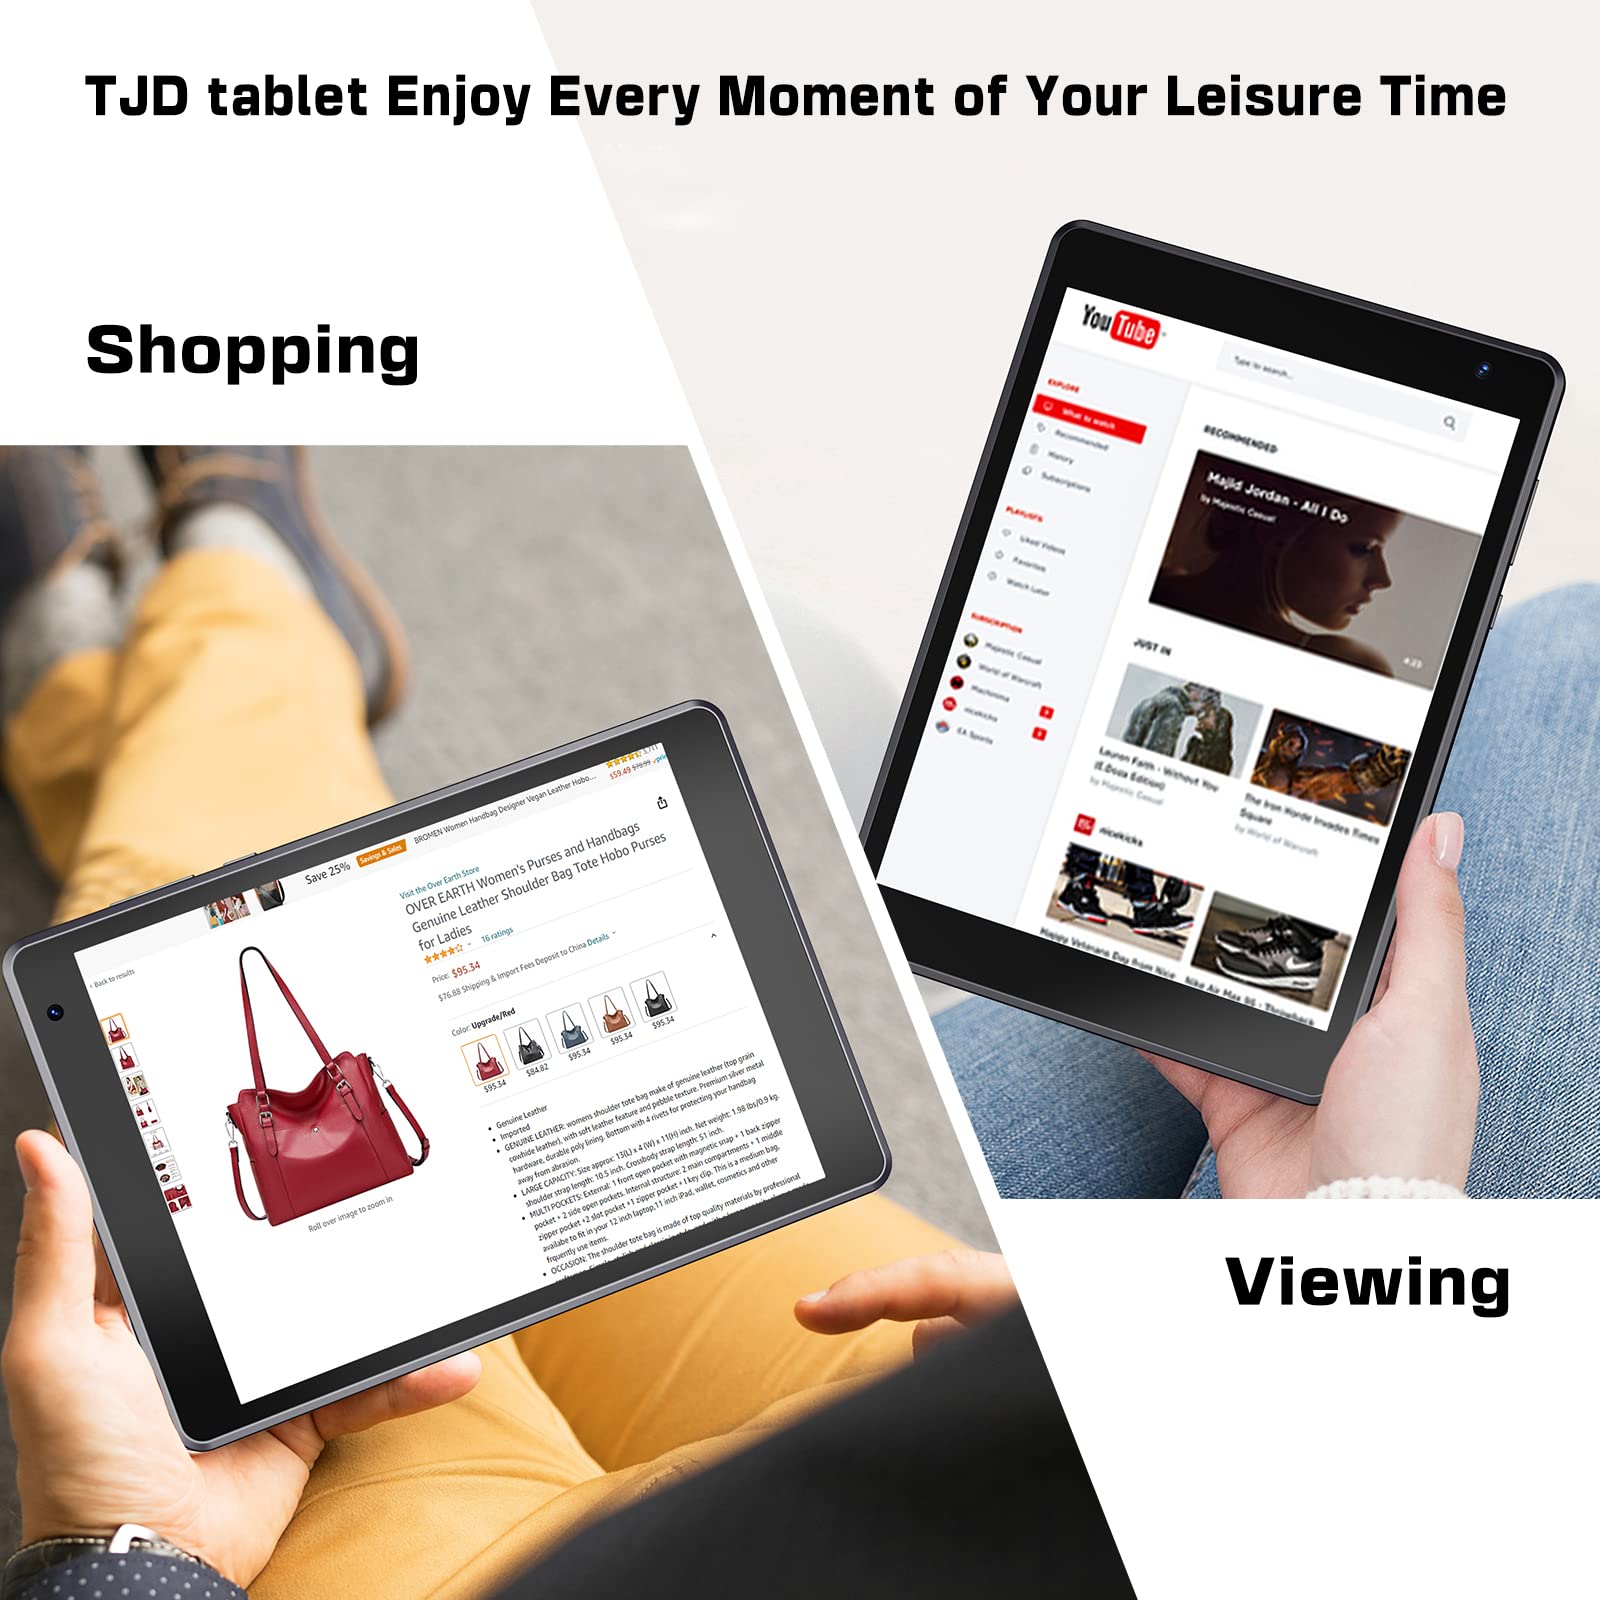 TJD Tablet 7.5 inch, Android 12.0 Smart Tablets 64GB Storage 512GB Expandable, Quad-Core Processor, Google GMS Certified Tablet Computer, PS FHD 1440x1080 Resolution Display, WiFi/Bluetooth 5.0